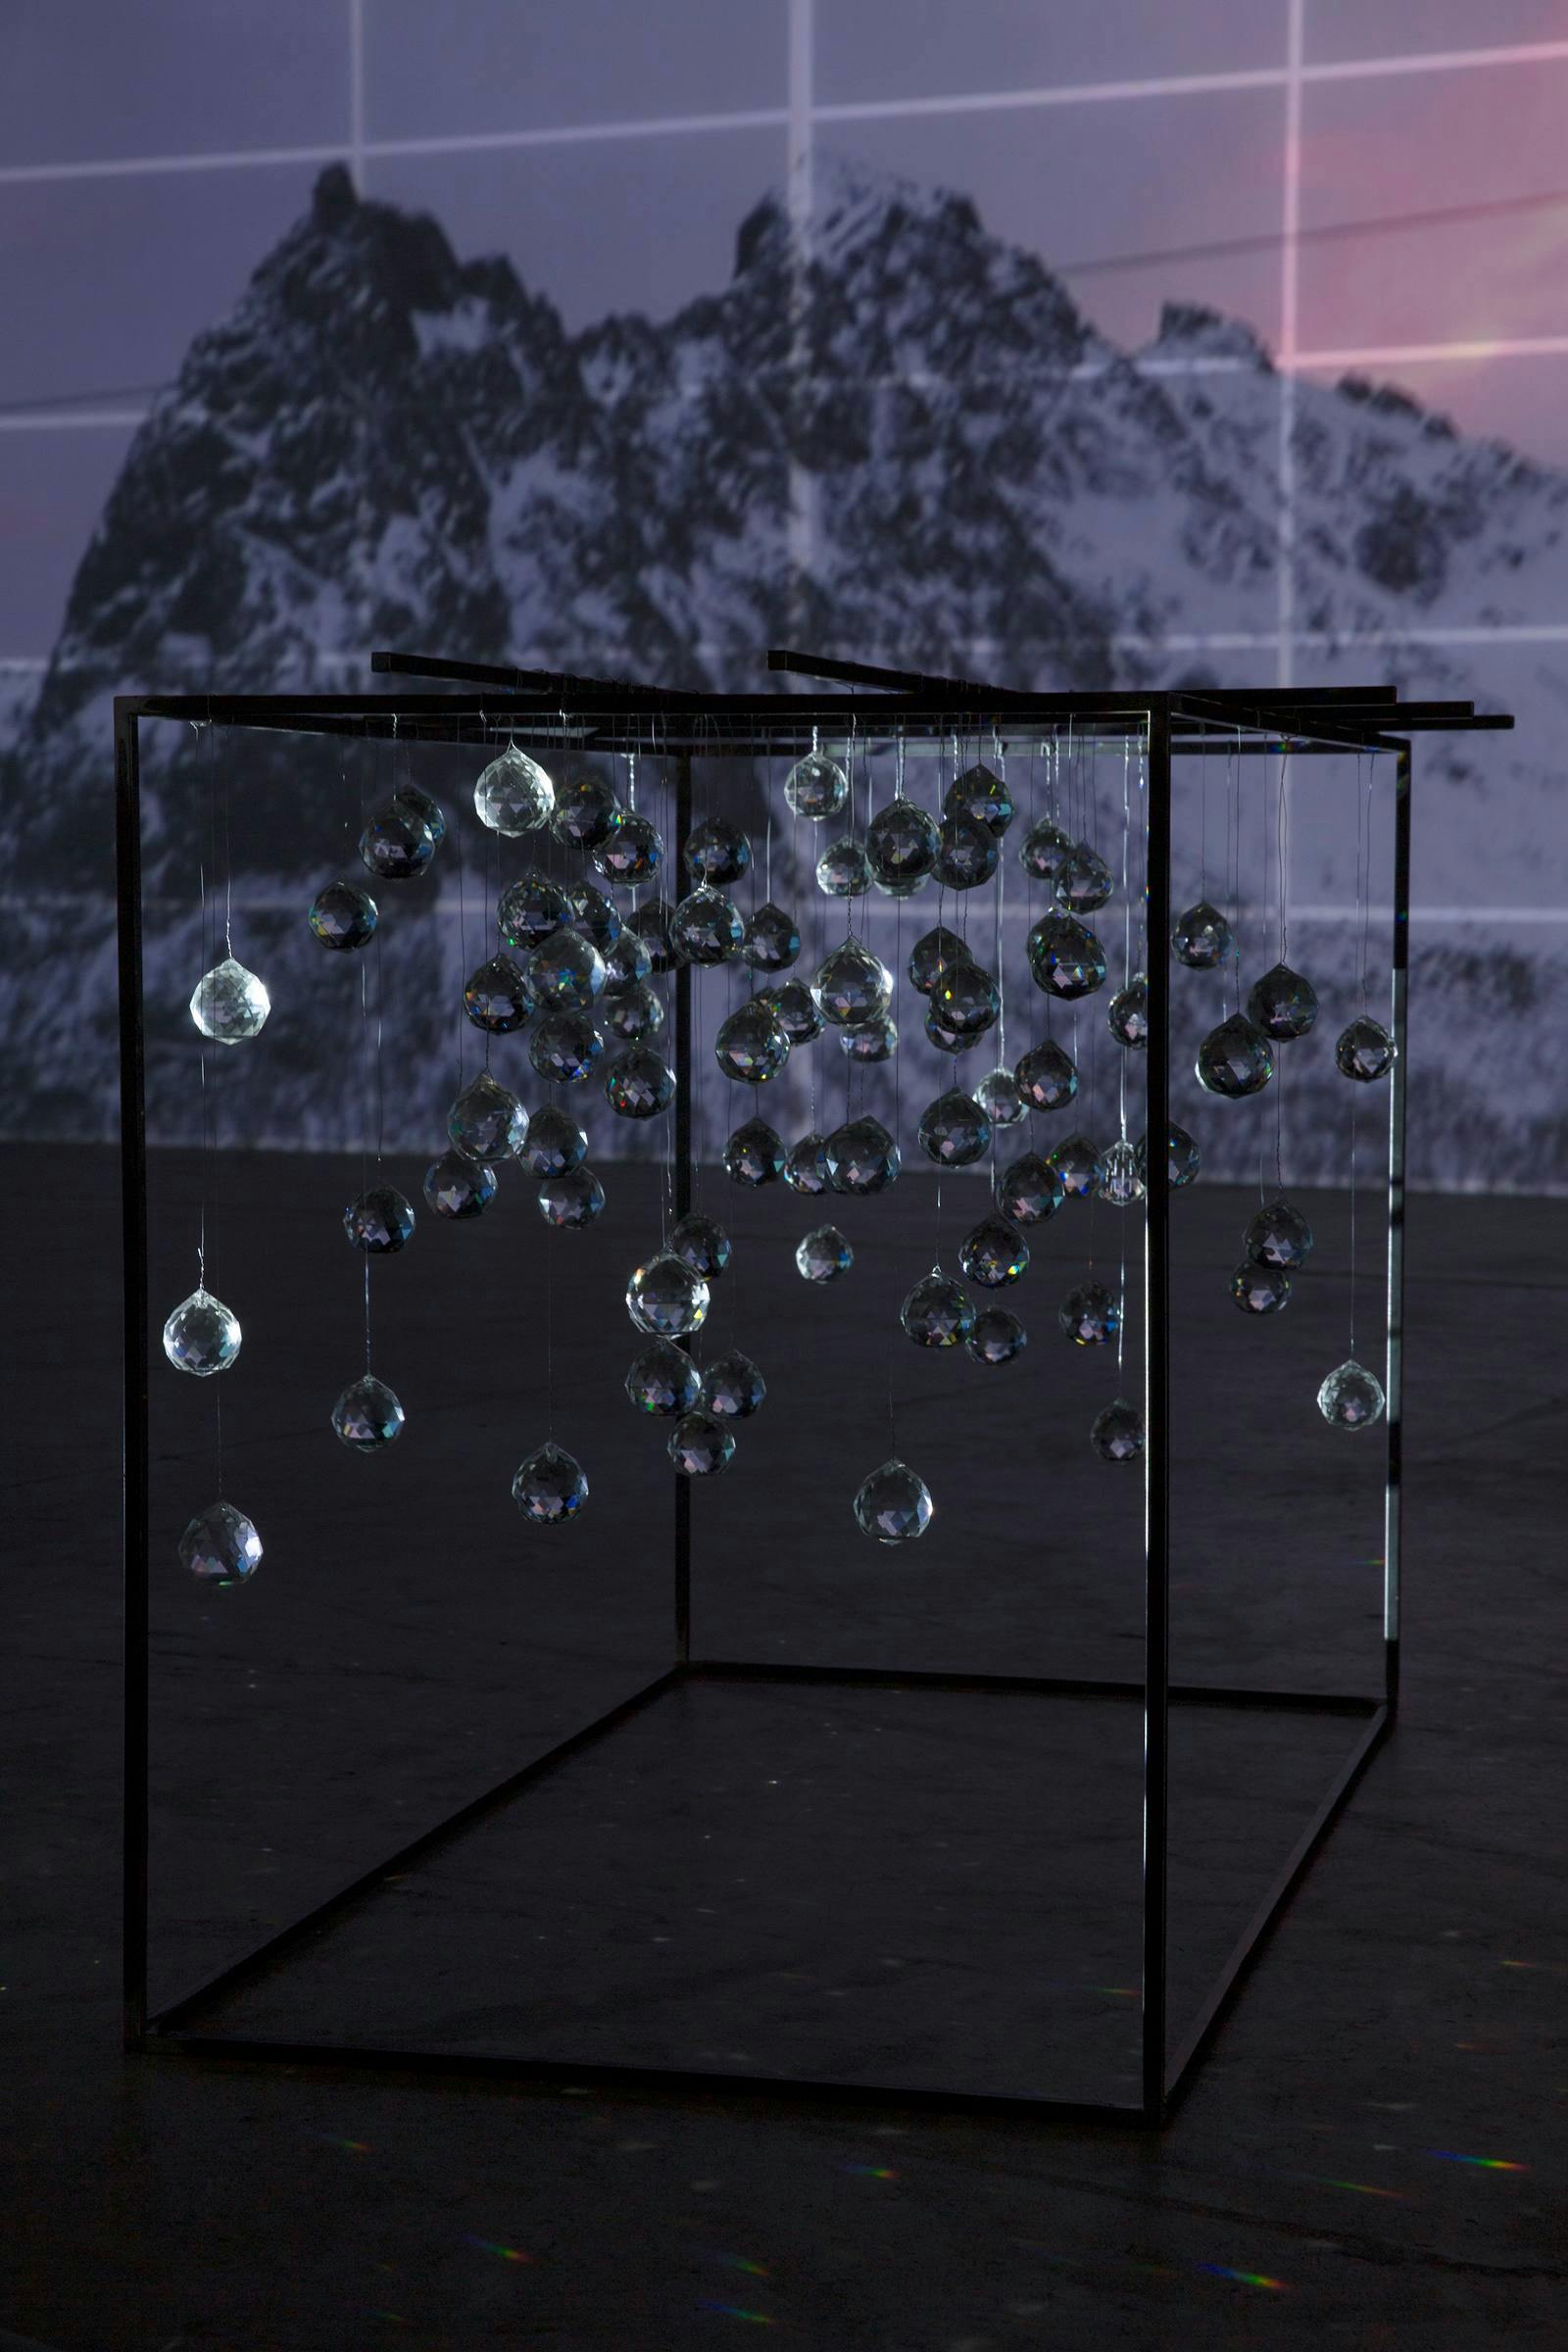 an installation view of Joan Jonas, Ice Drawing Sculpture. There is a projection of mountains in the background and a metal open cube structure with glass spheres hanging from it in the foreground